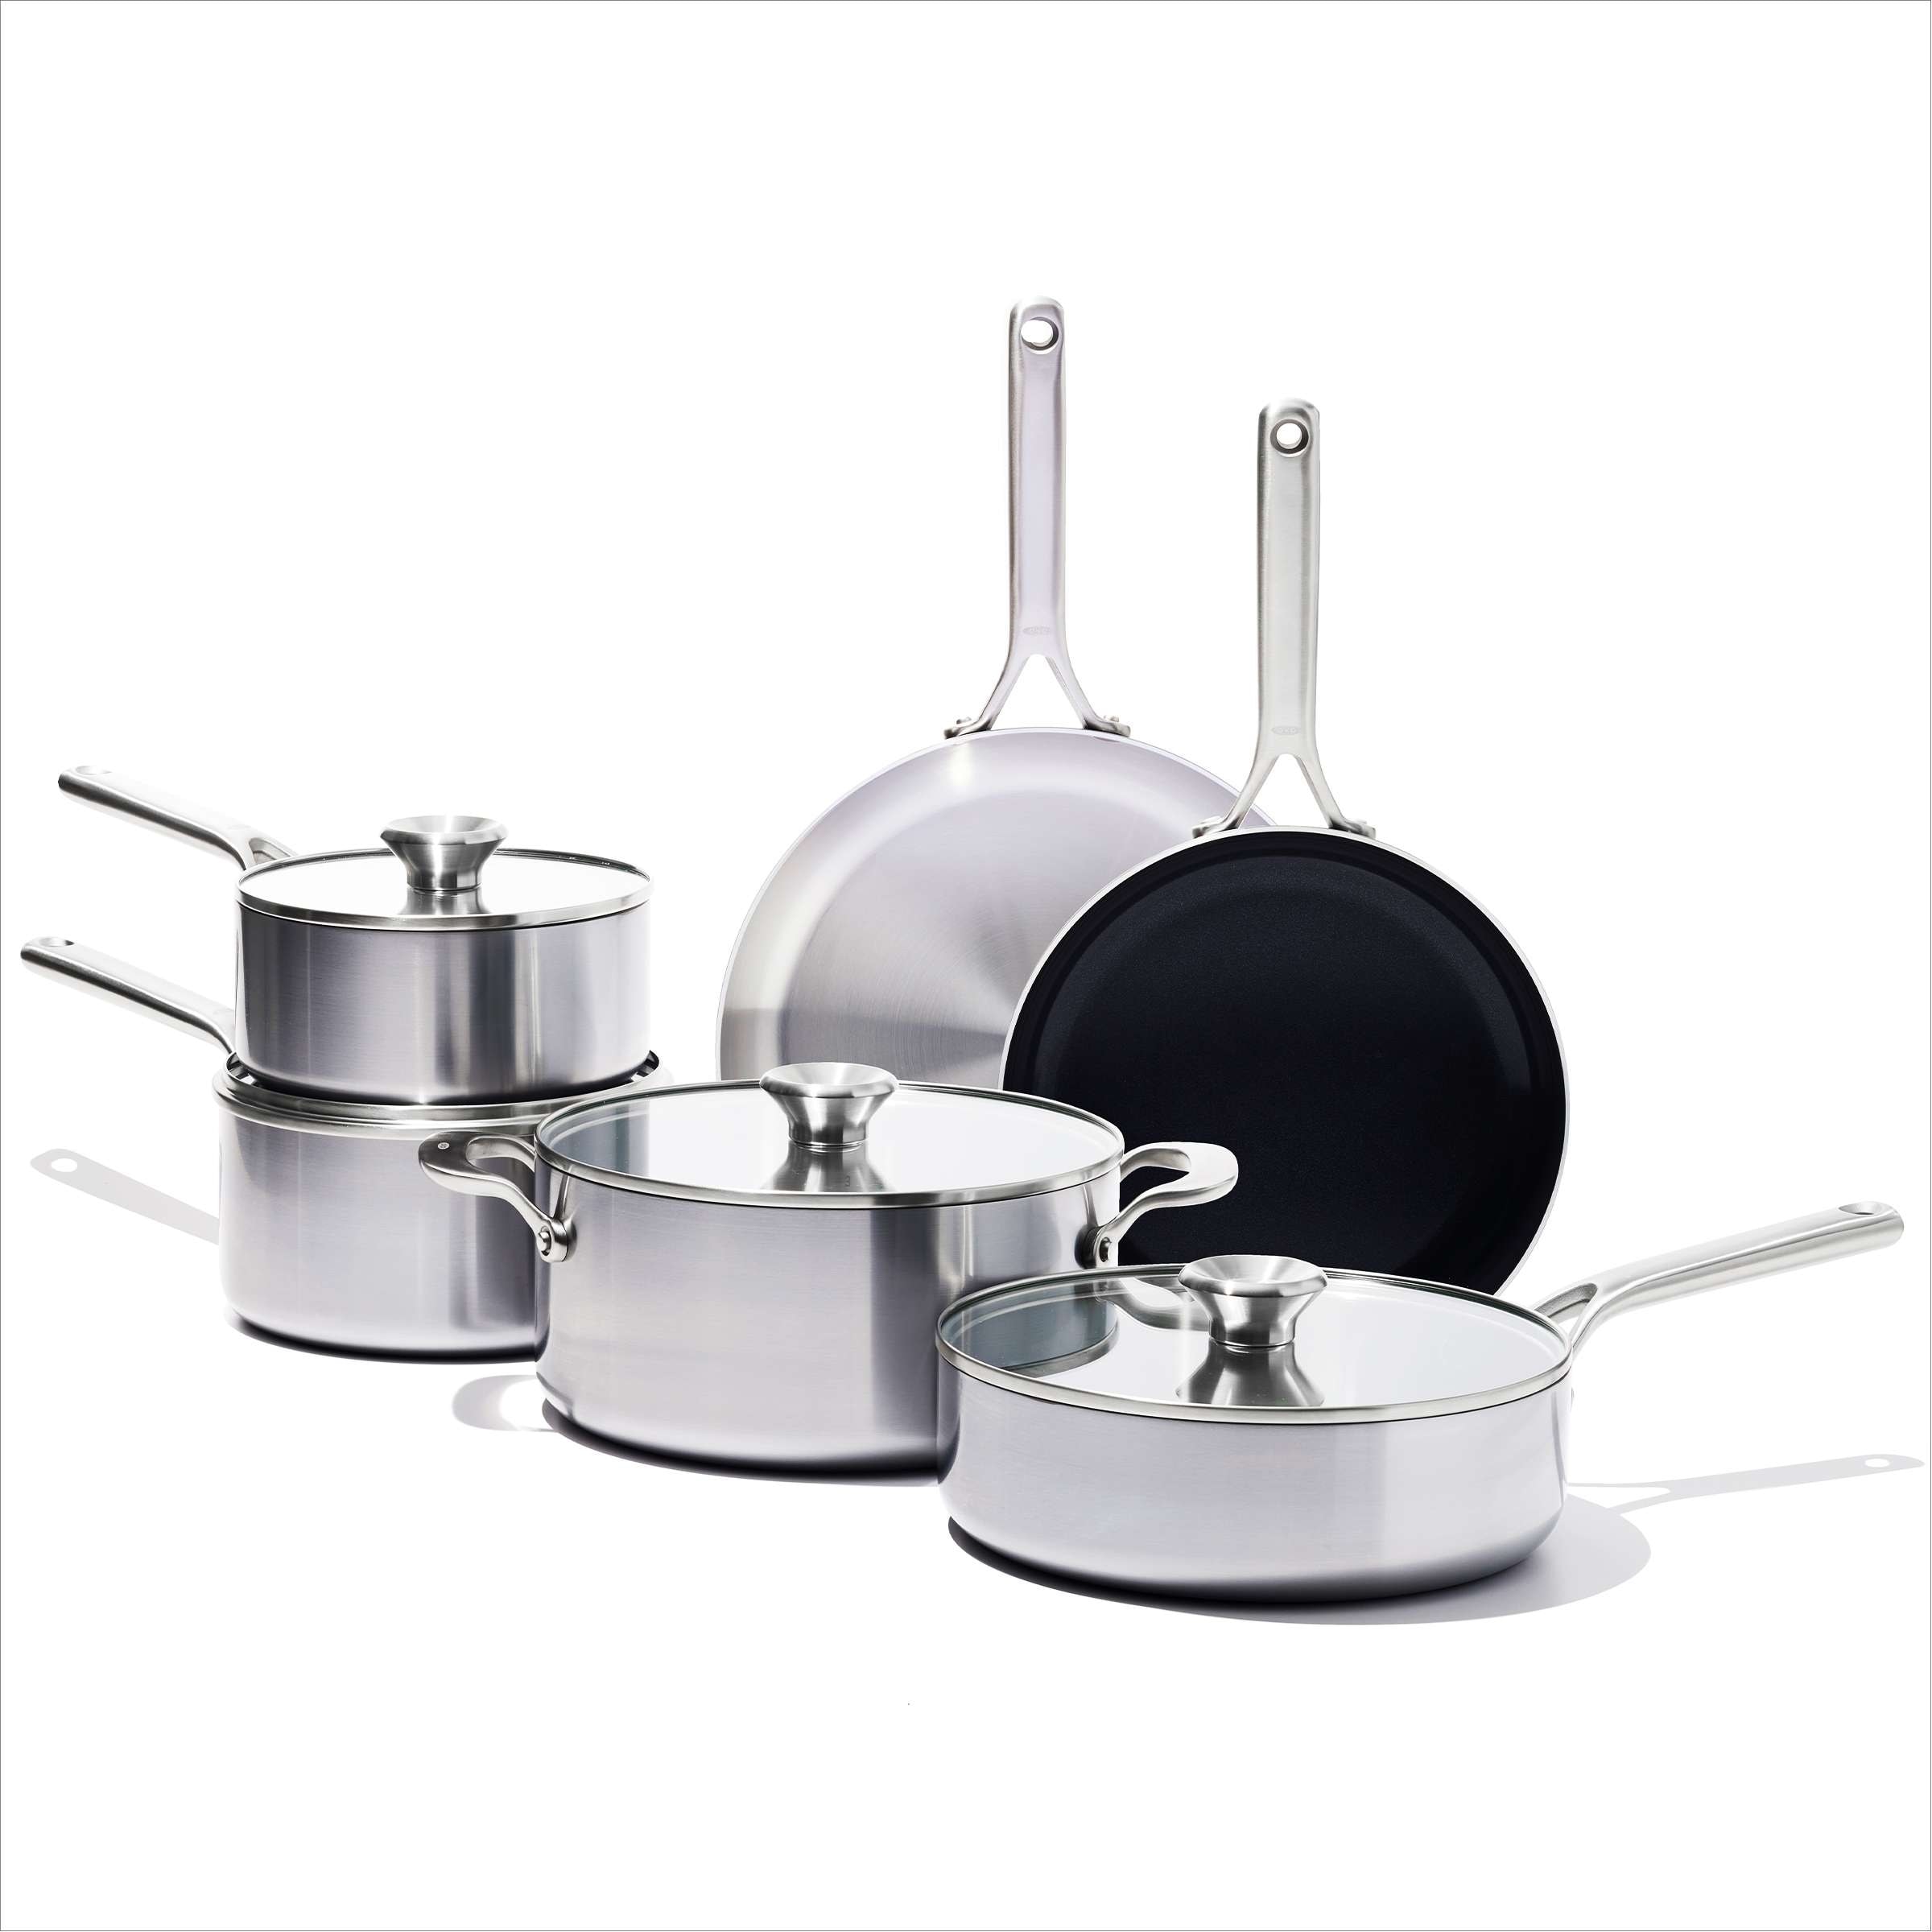 https://ak1.ostkcdn.com/images/products/is/images/direct/8780869b2ac6fe59b81abdc44d20ac5dfc30a5b7/OXO-Mira-3-Ply-Stainless-Steel-Cookware-Pots-and-Pans-Set%2C-10-Piece.jpg